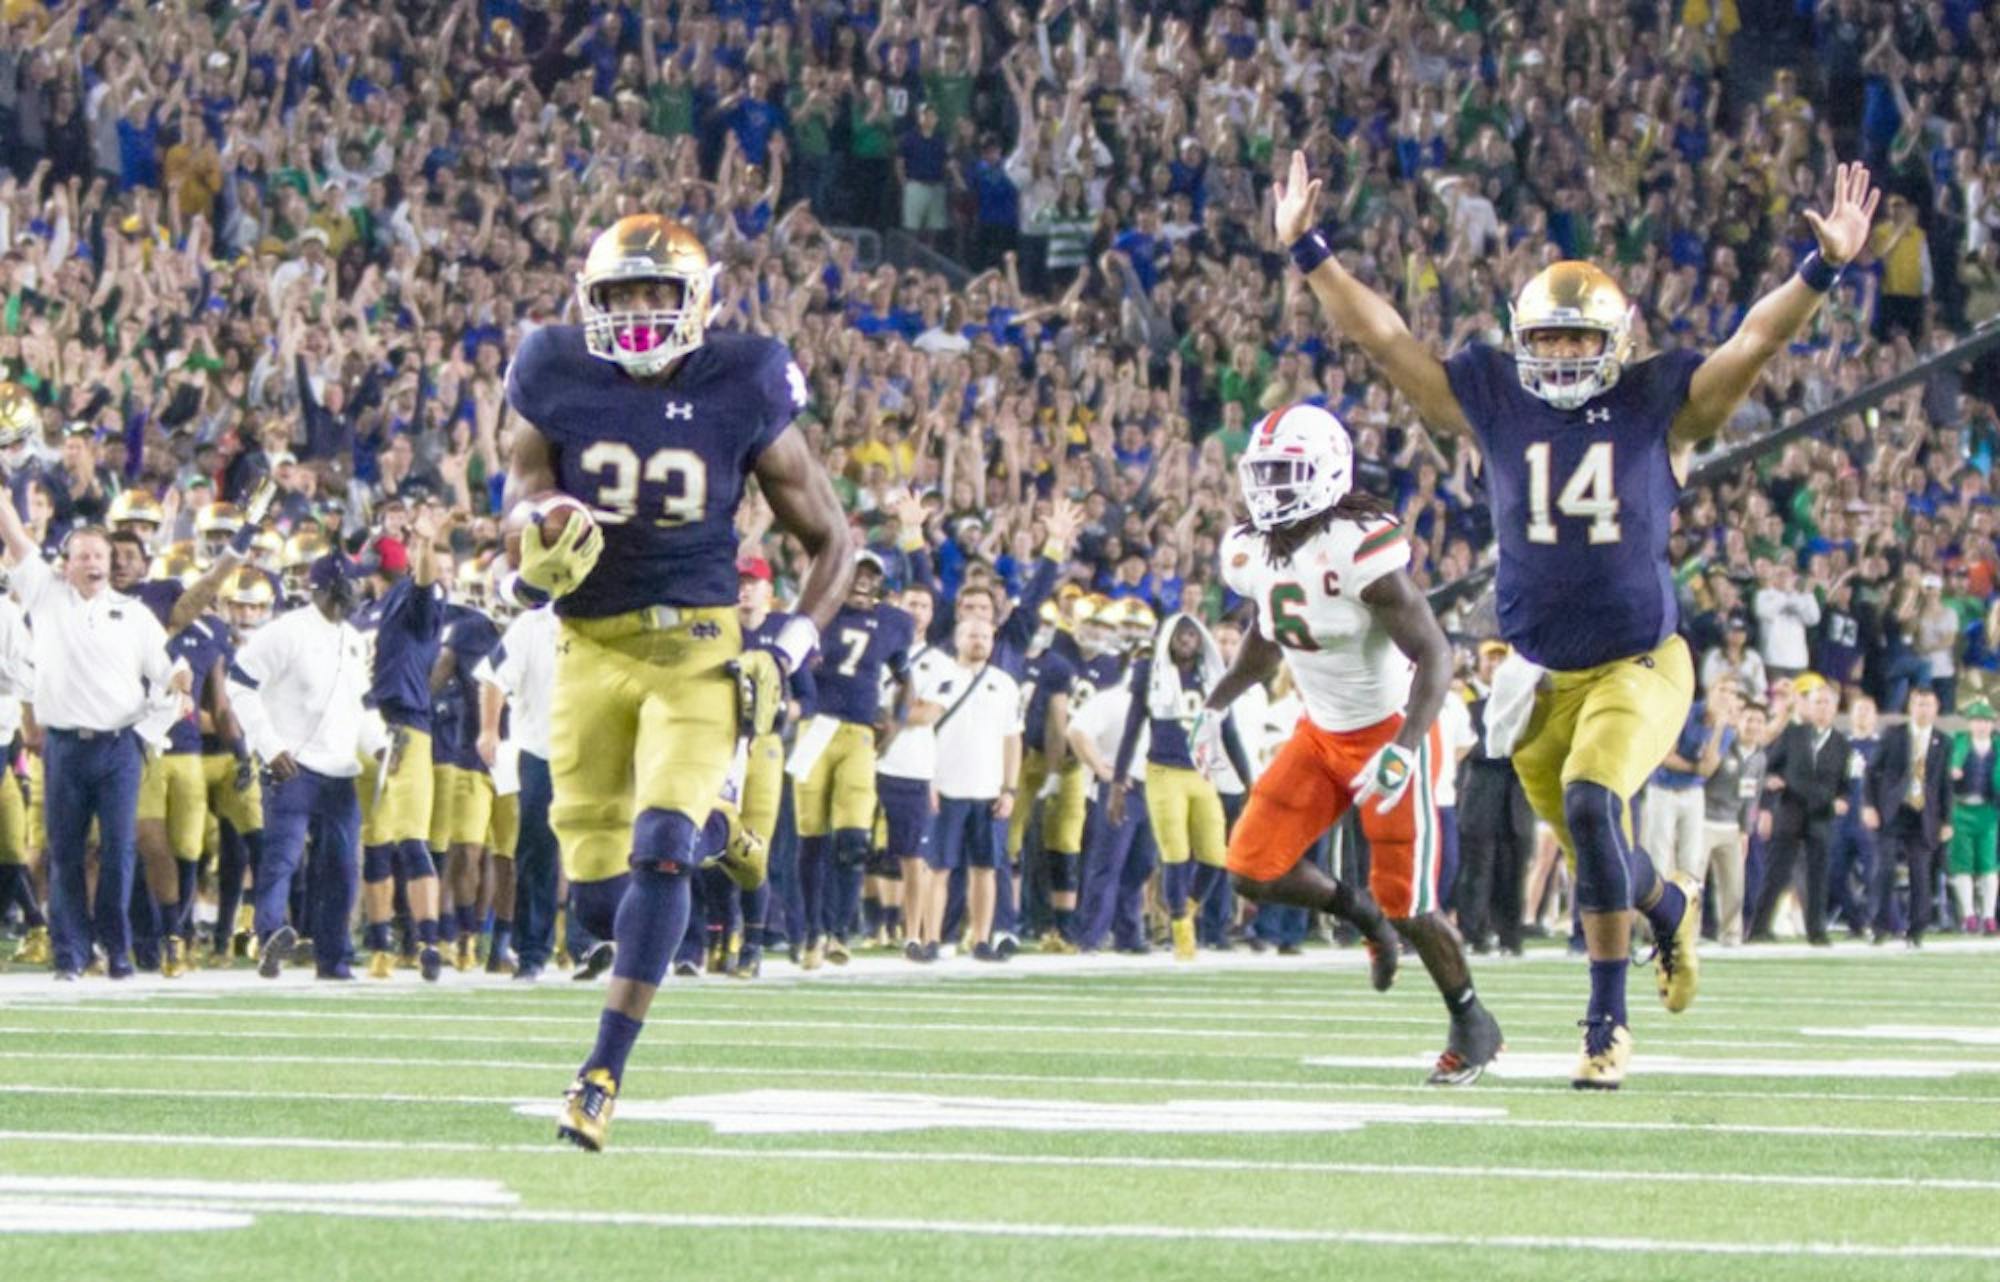 Irish sophomore running back Josh Adams sprints into the end zone to score the game-tying touchdown against Miami on Saturday at Notre Dame Stadium as junior quarterback DeShone Kizer, right, begins celebrating with the rest of the Irish faithful. Sophomore kicker Justin Yoon hit a 27-yard field goal with 30 seconds left to give the Irish the 30-27 win.